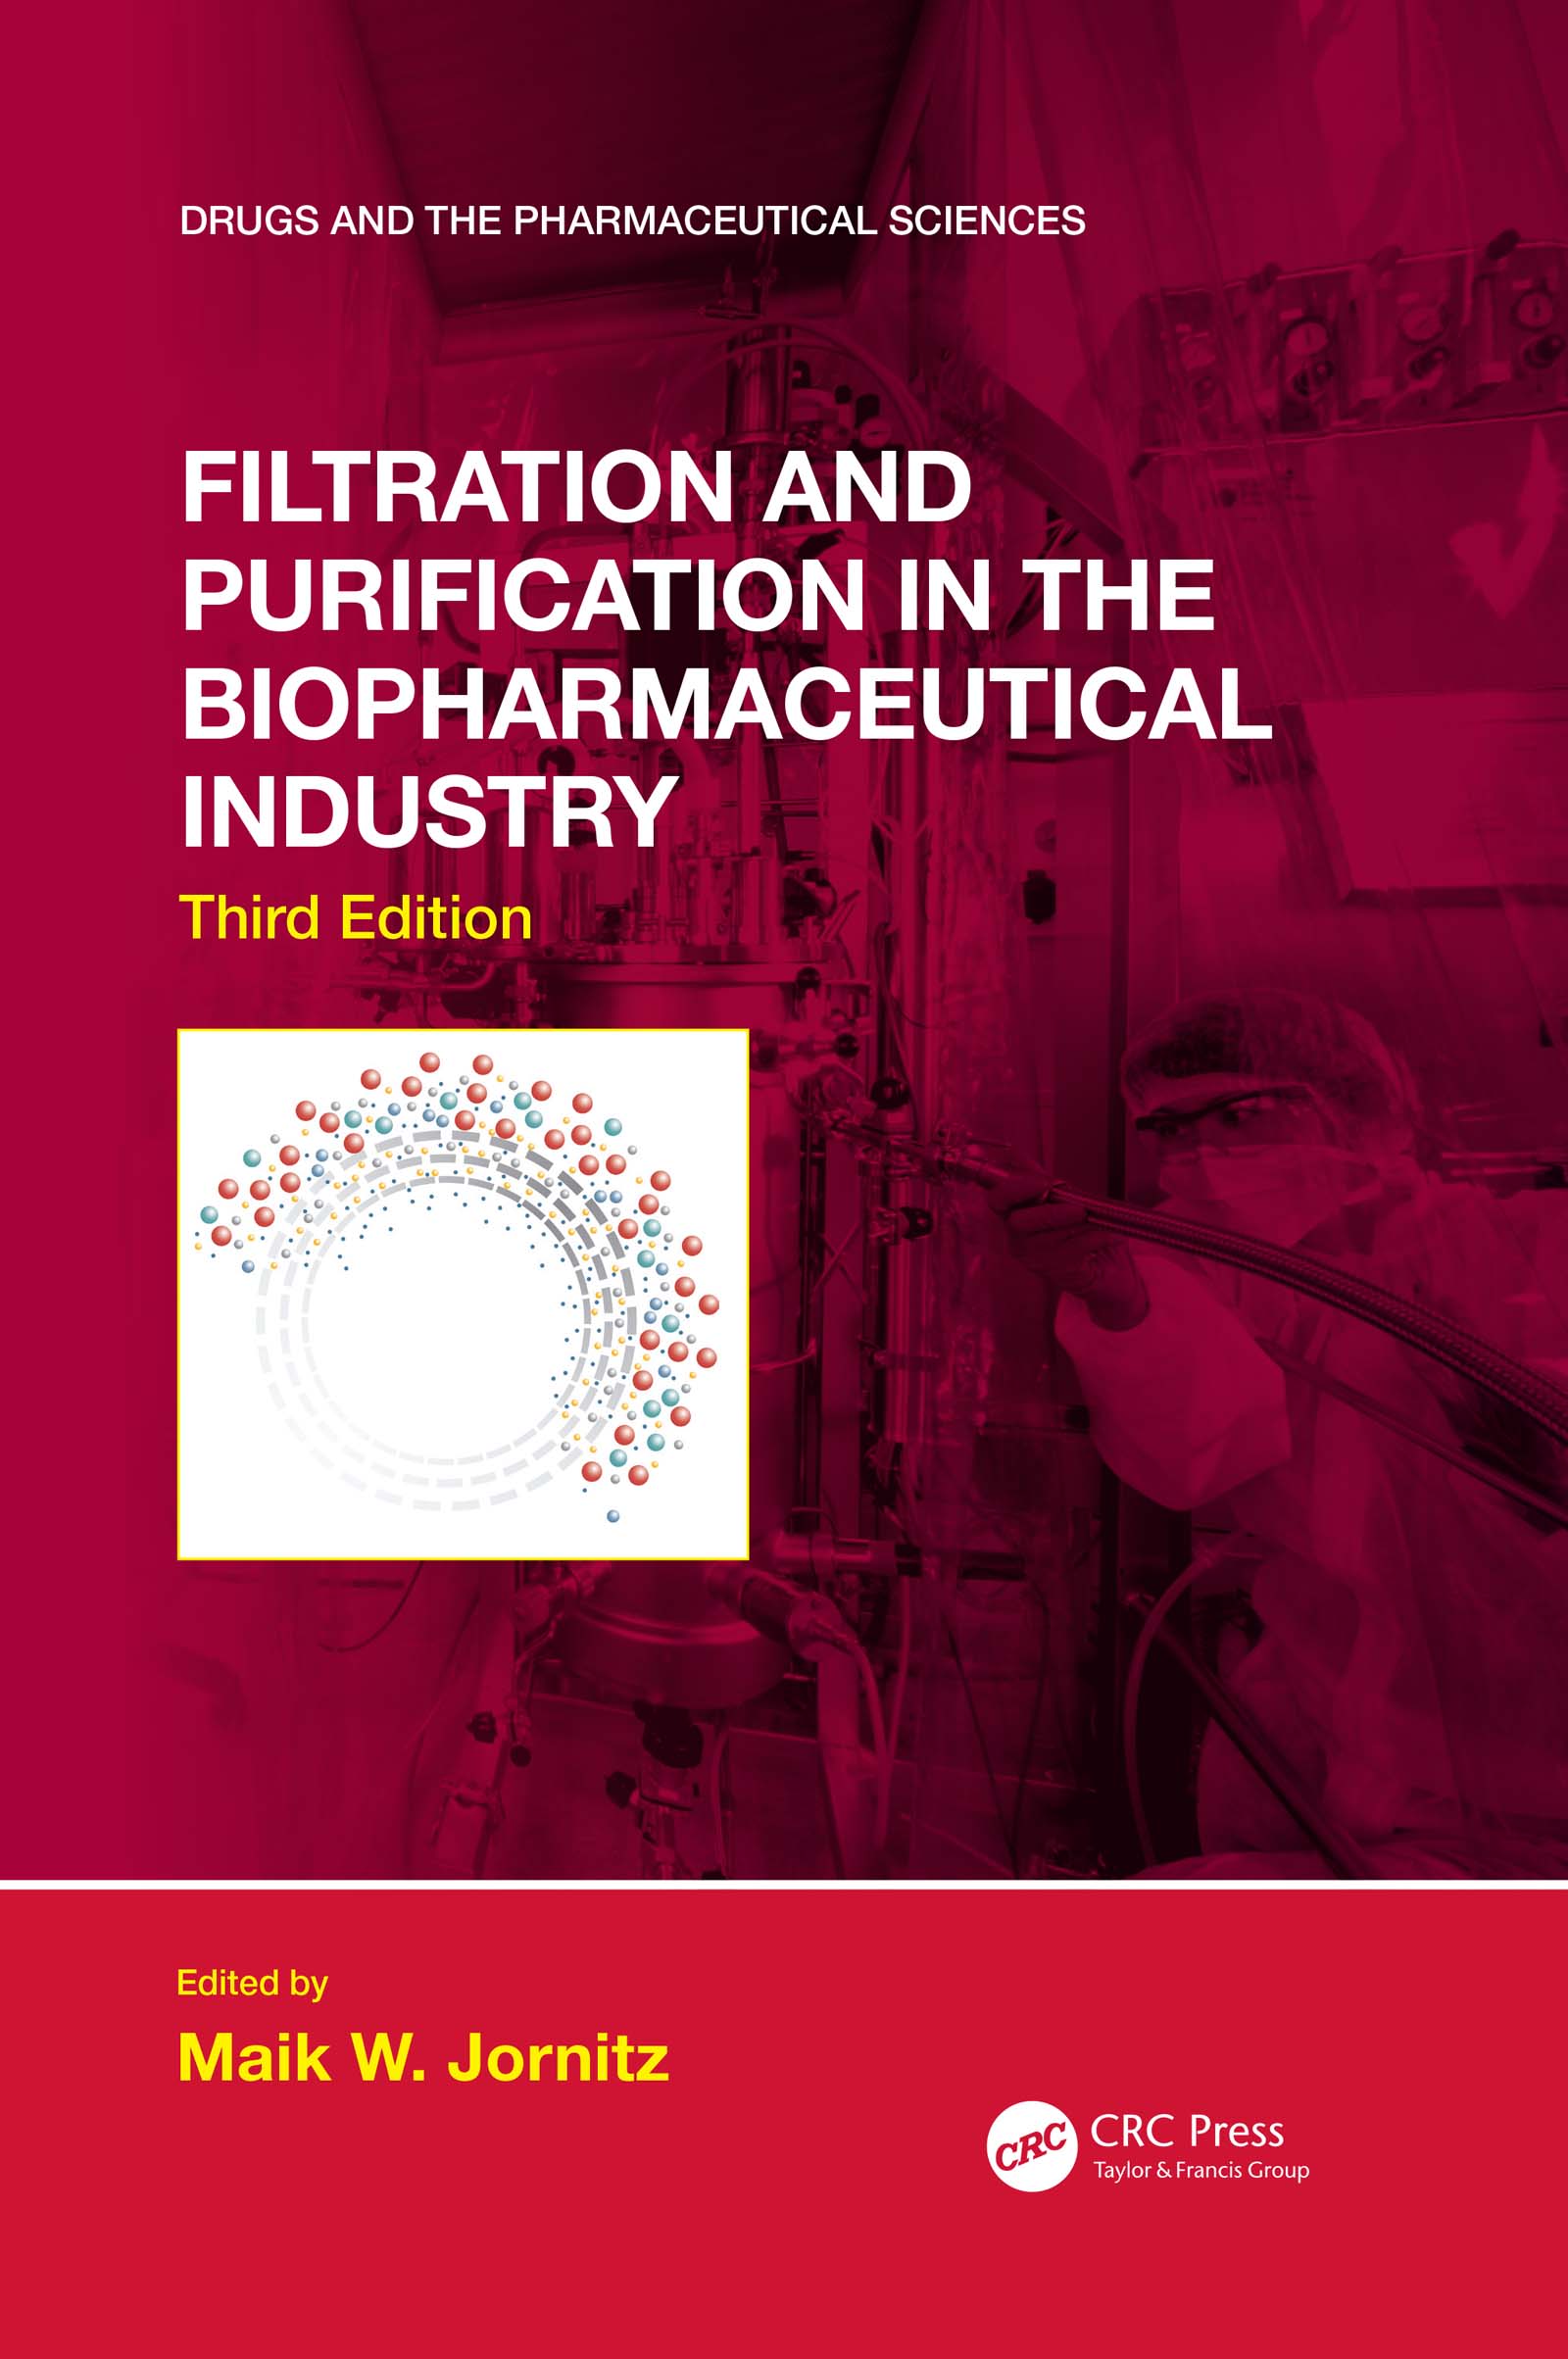 filtration and purification in the biopharmaceutical industry 3rd edition maik w jornitz 1351675680,